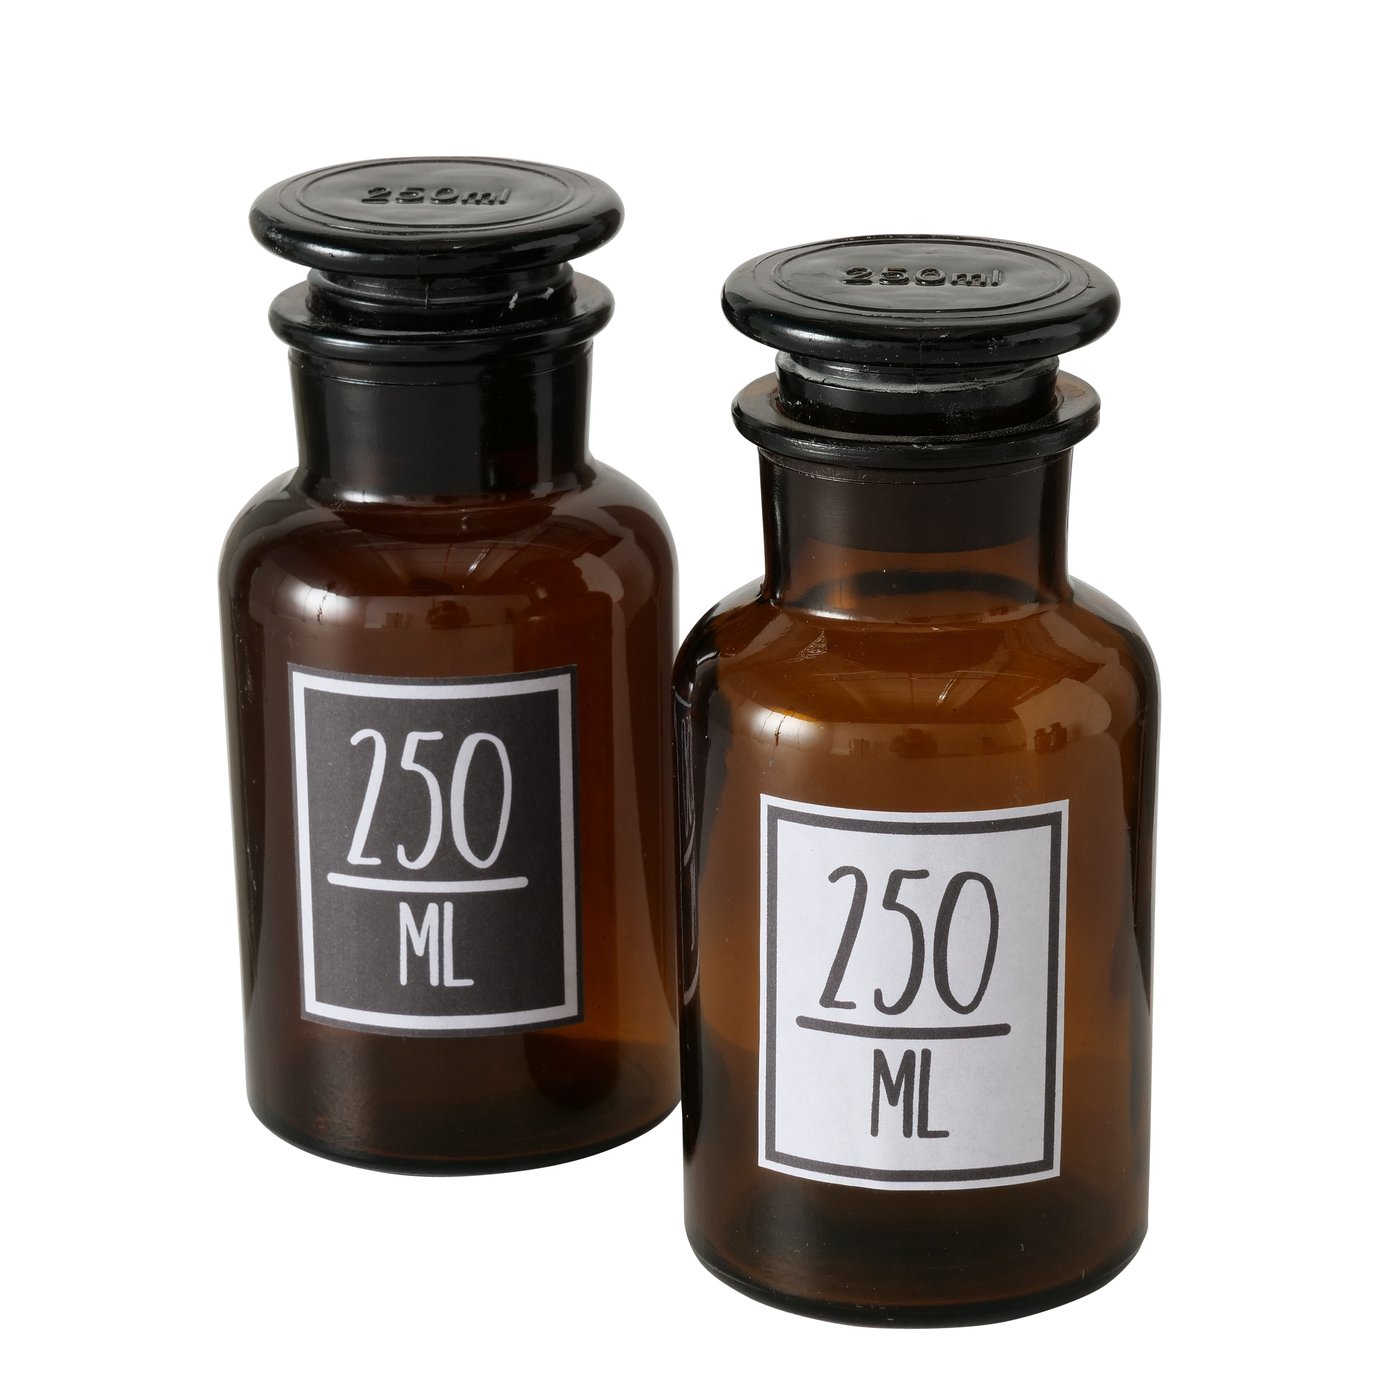 &Quirky Small Brown Glass Apothecary 250ml Jar With Lid : Black or White